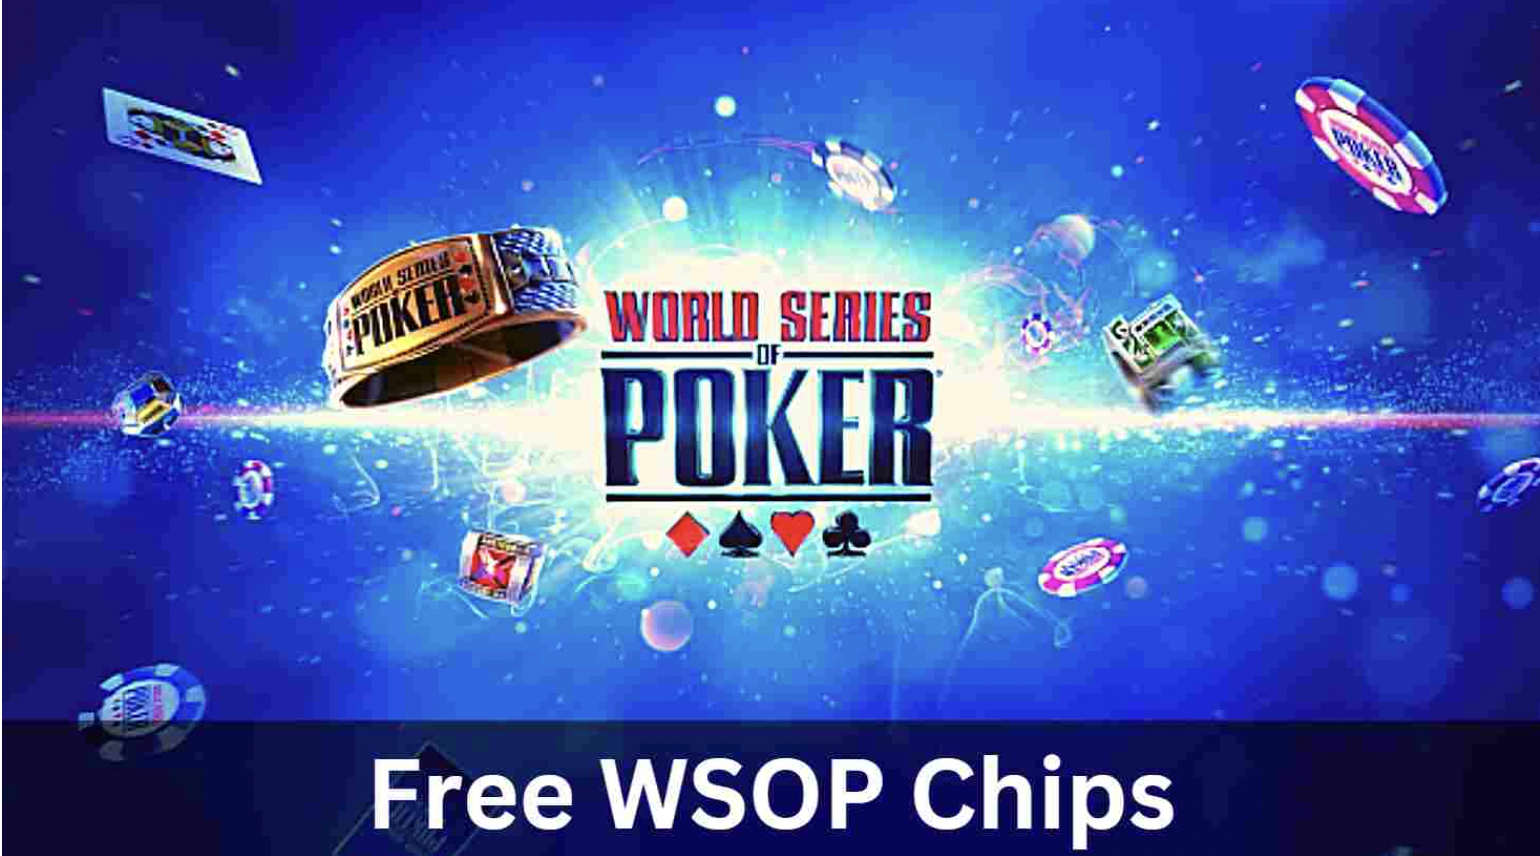 FREE WSOP Chips - Promo Codes Claimed [Working]